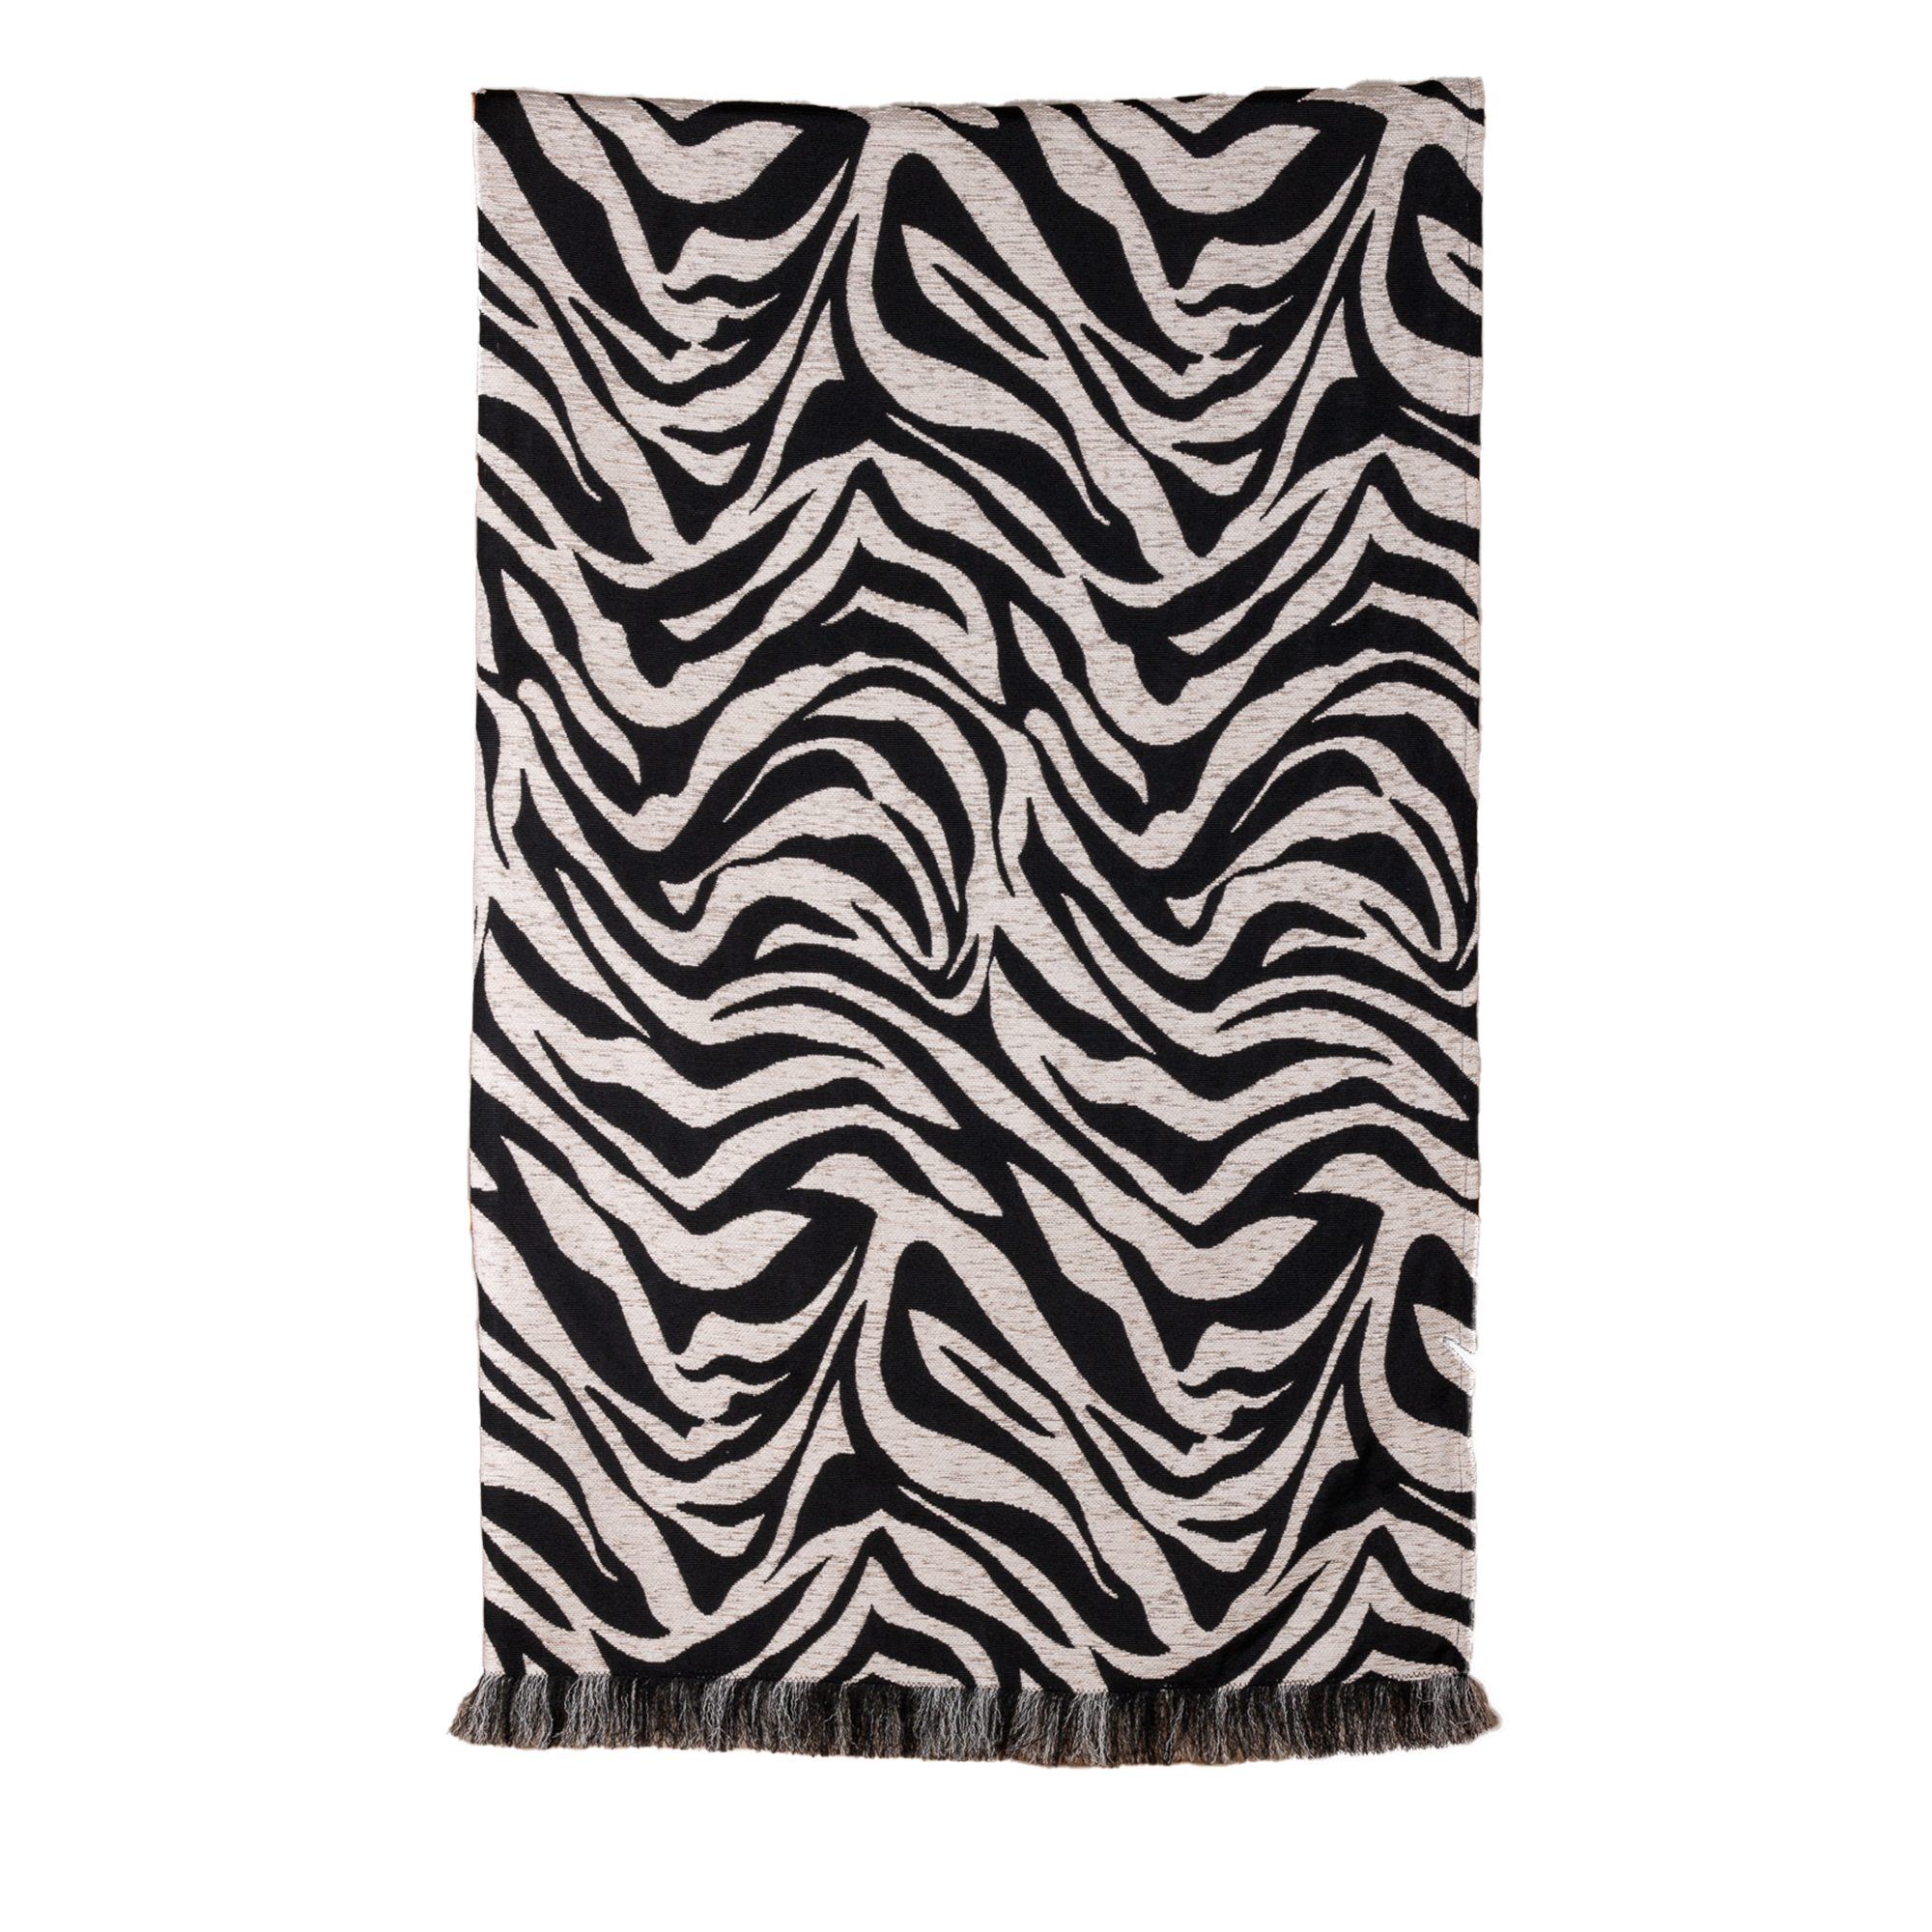 African Inspired Bedroom Throws